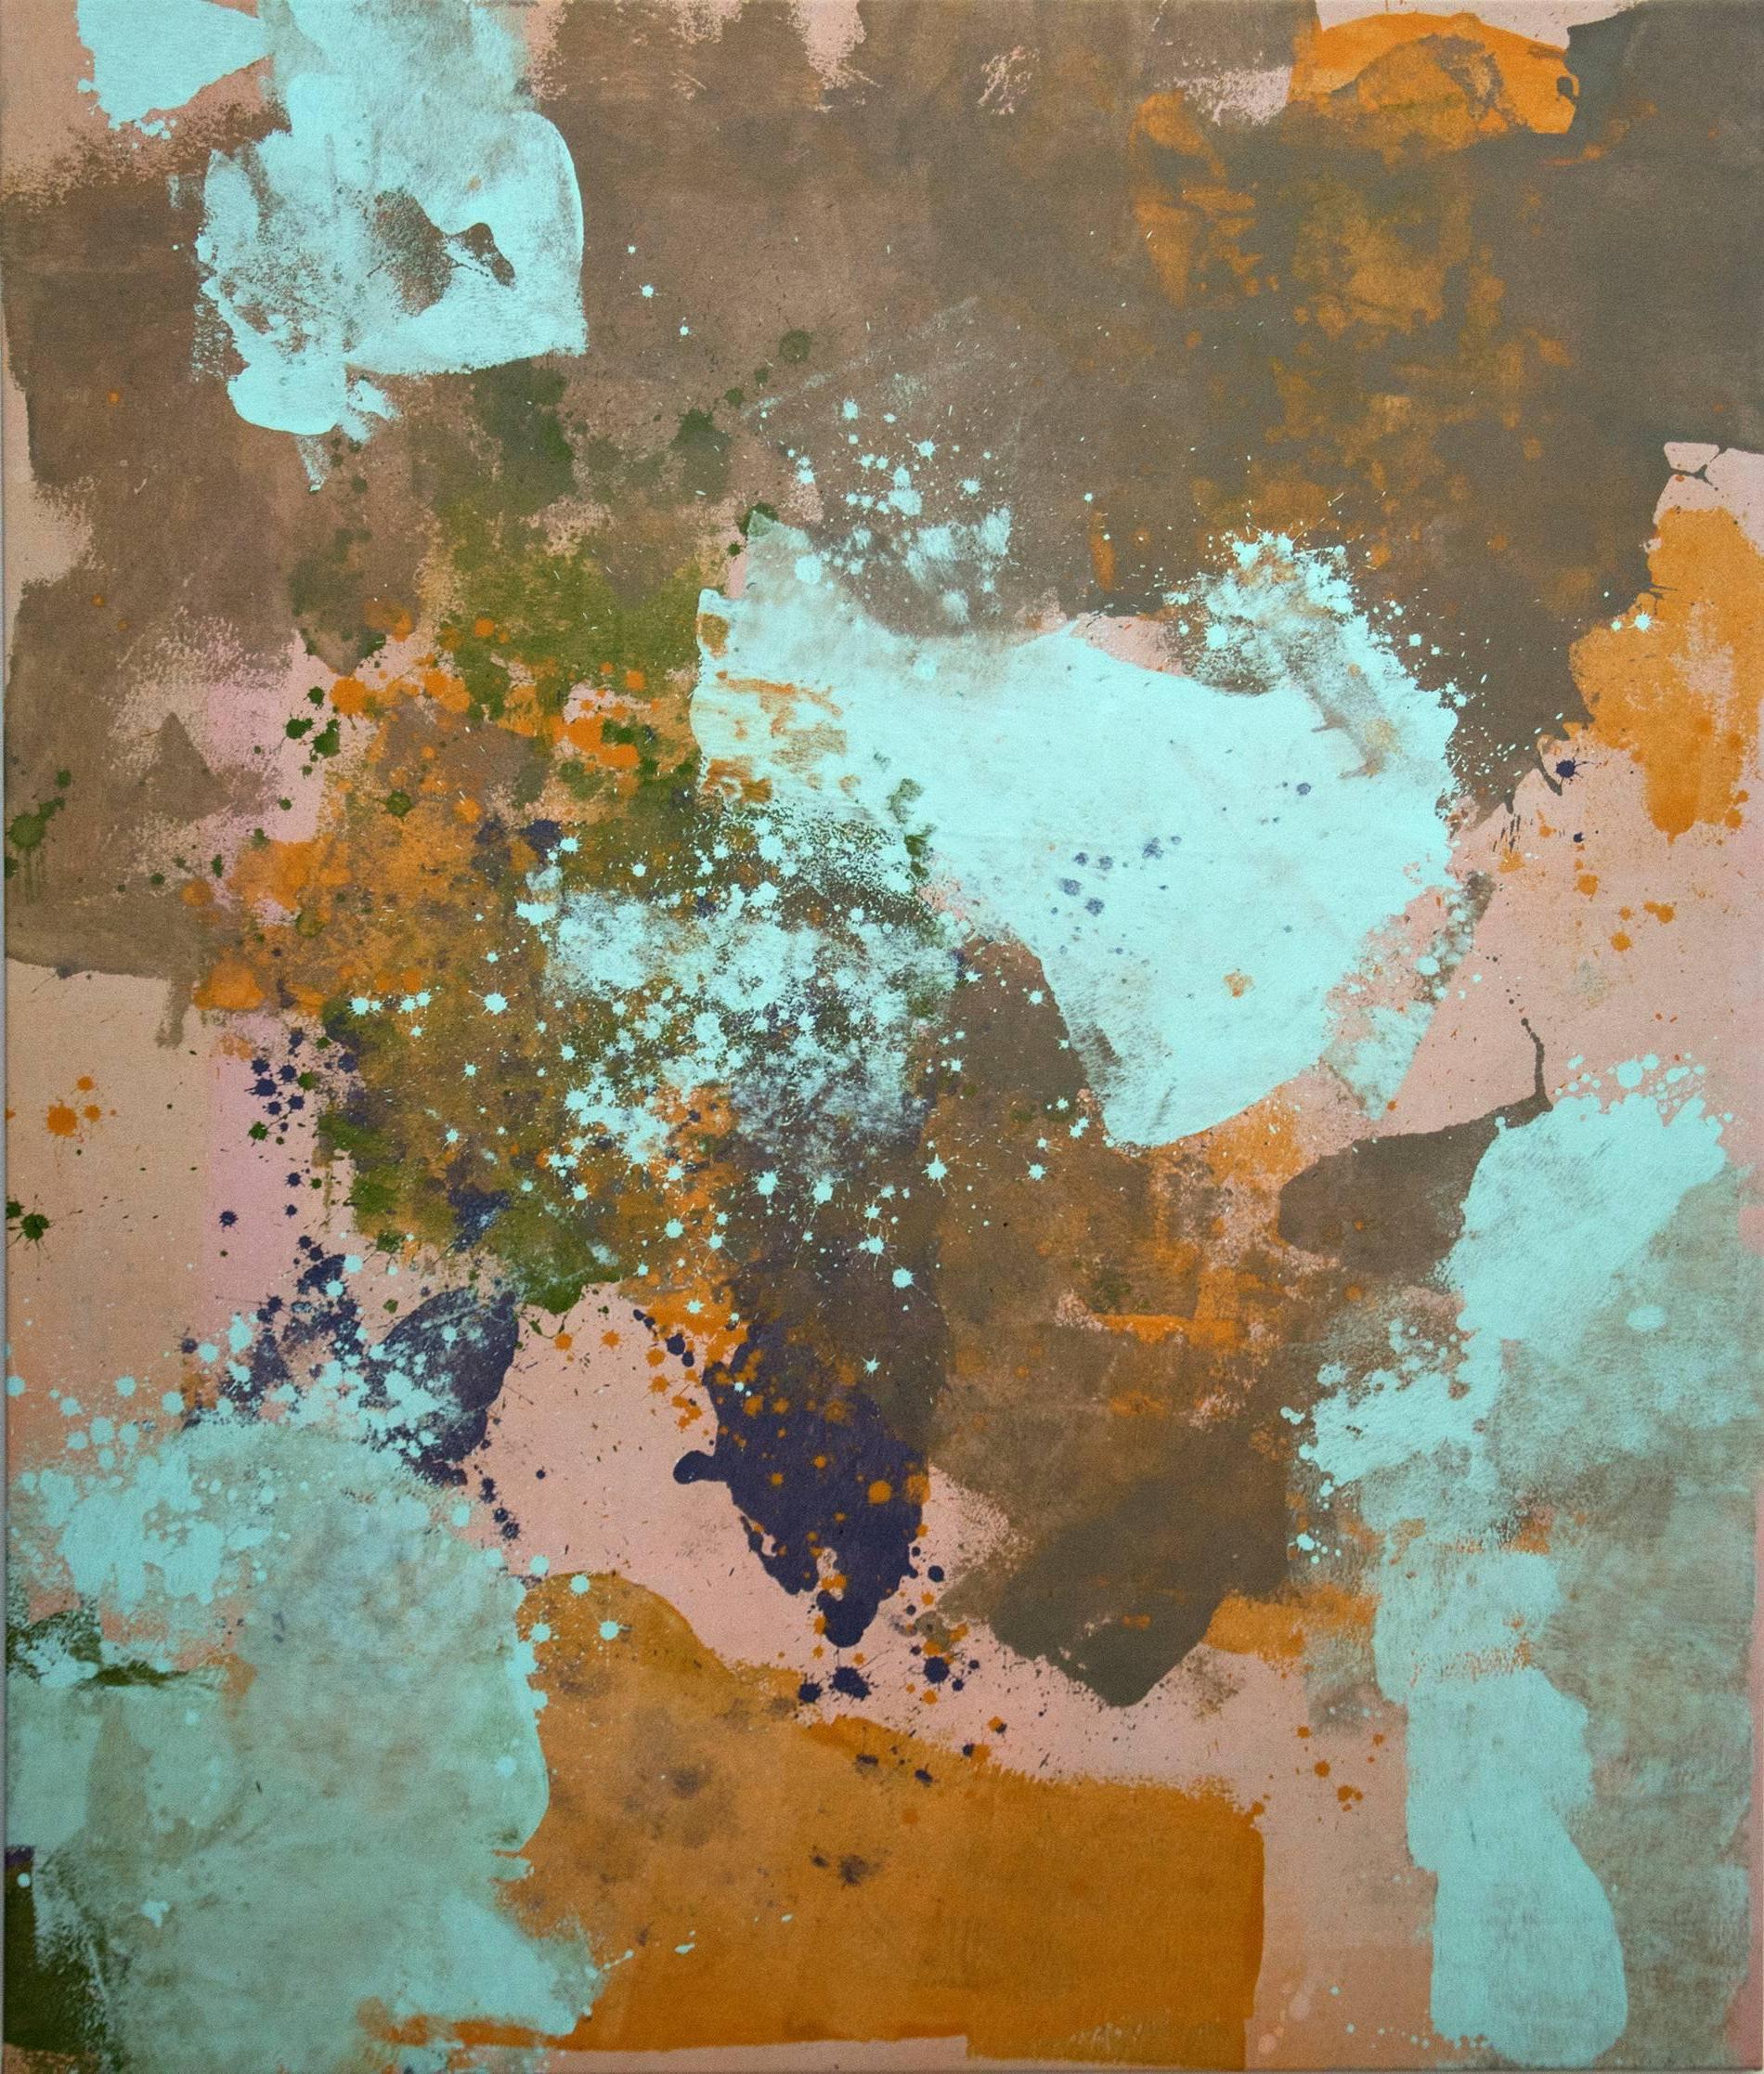 John Richard Fox Abstract Painting – Abstraction in Turquoise, Ultramarine and Burnt Sienna